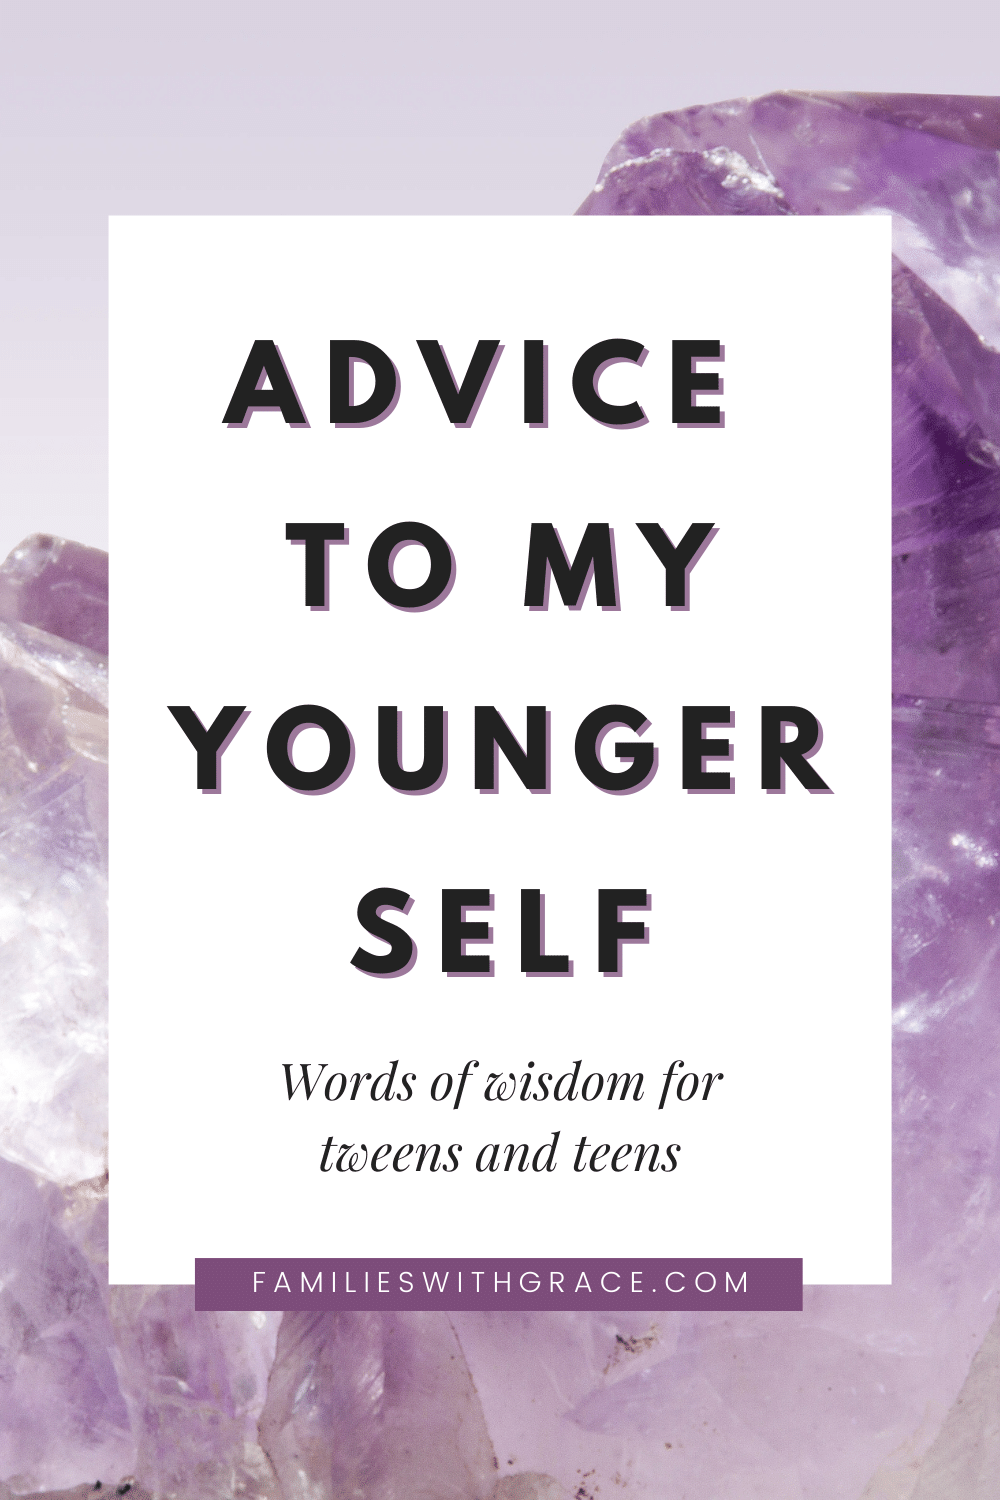 Advice to my younger self